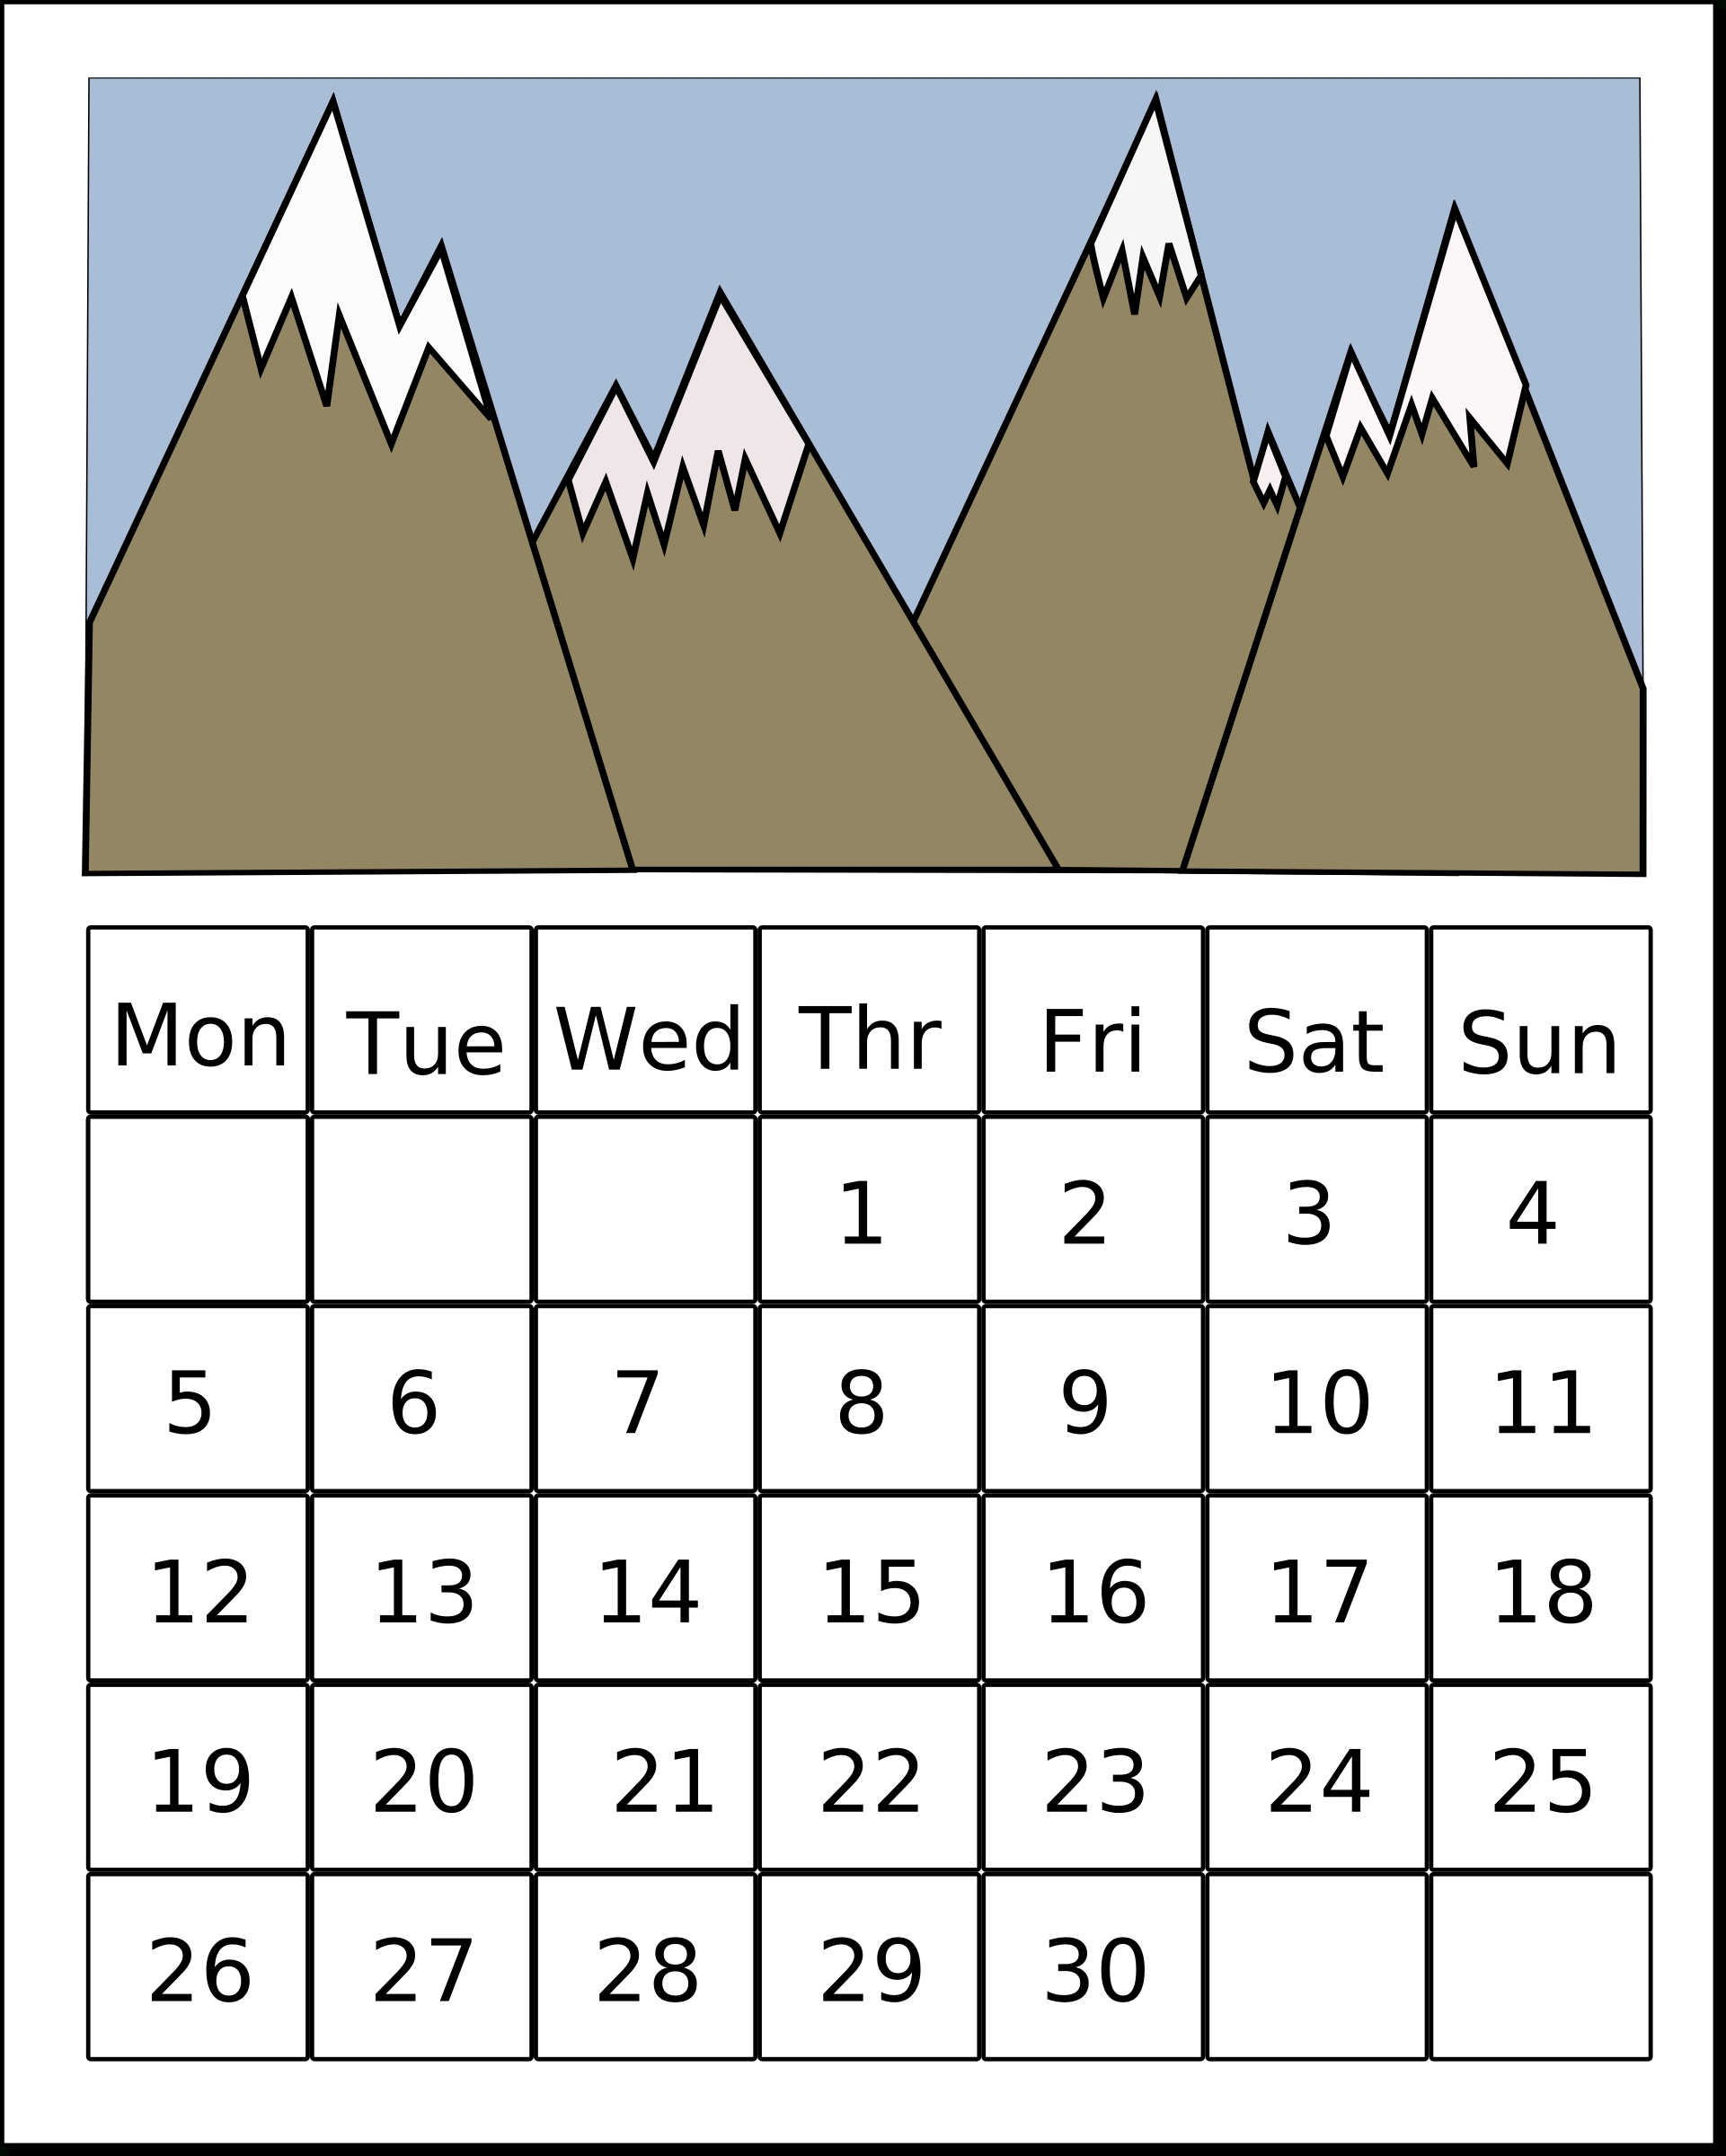 Calendar Of Stem-Related Seasonal Events And Holidays | Nise Network inside July August September October November December In Month How Much Holiday